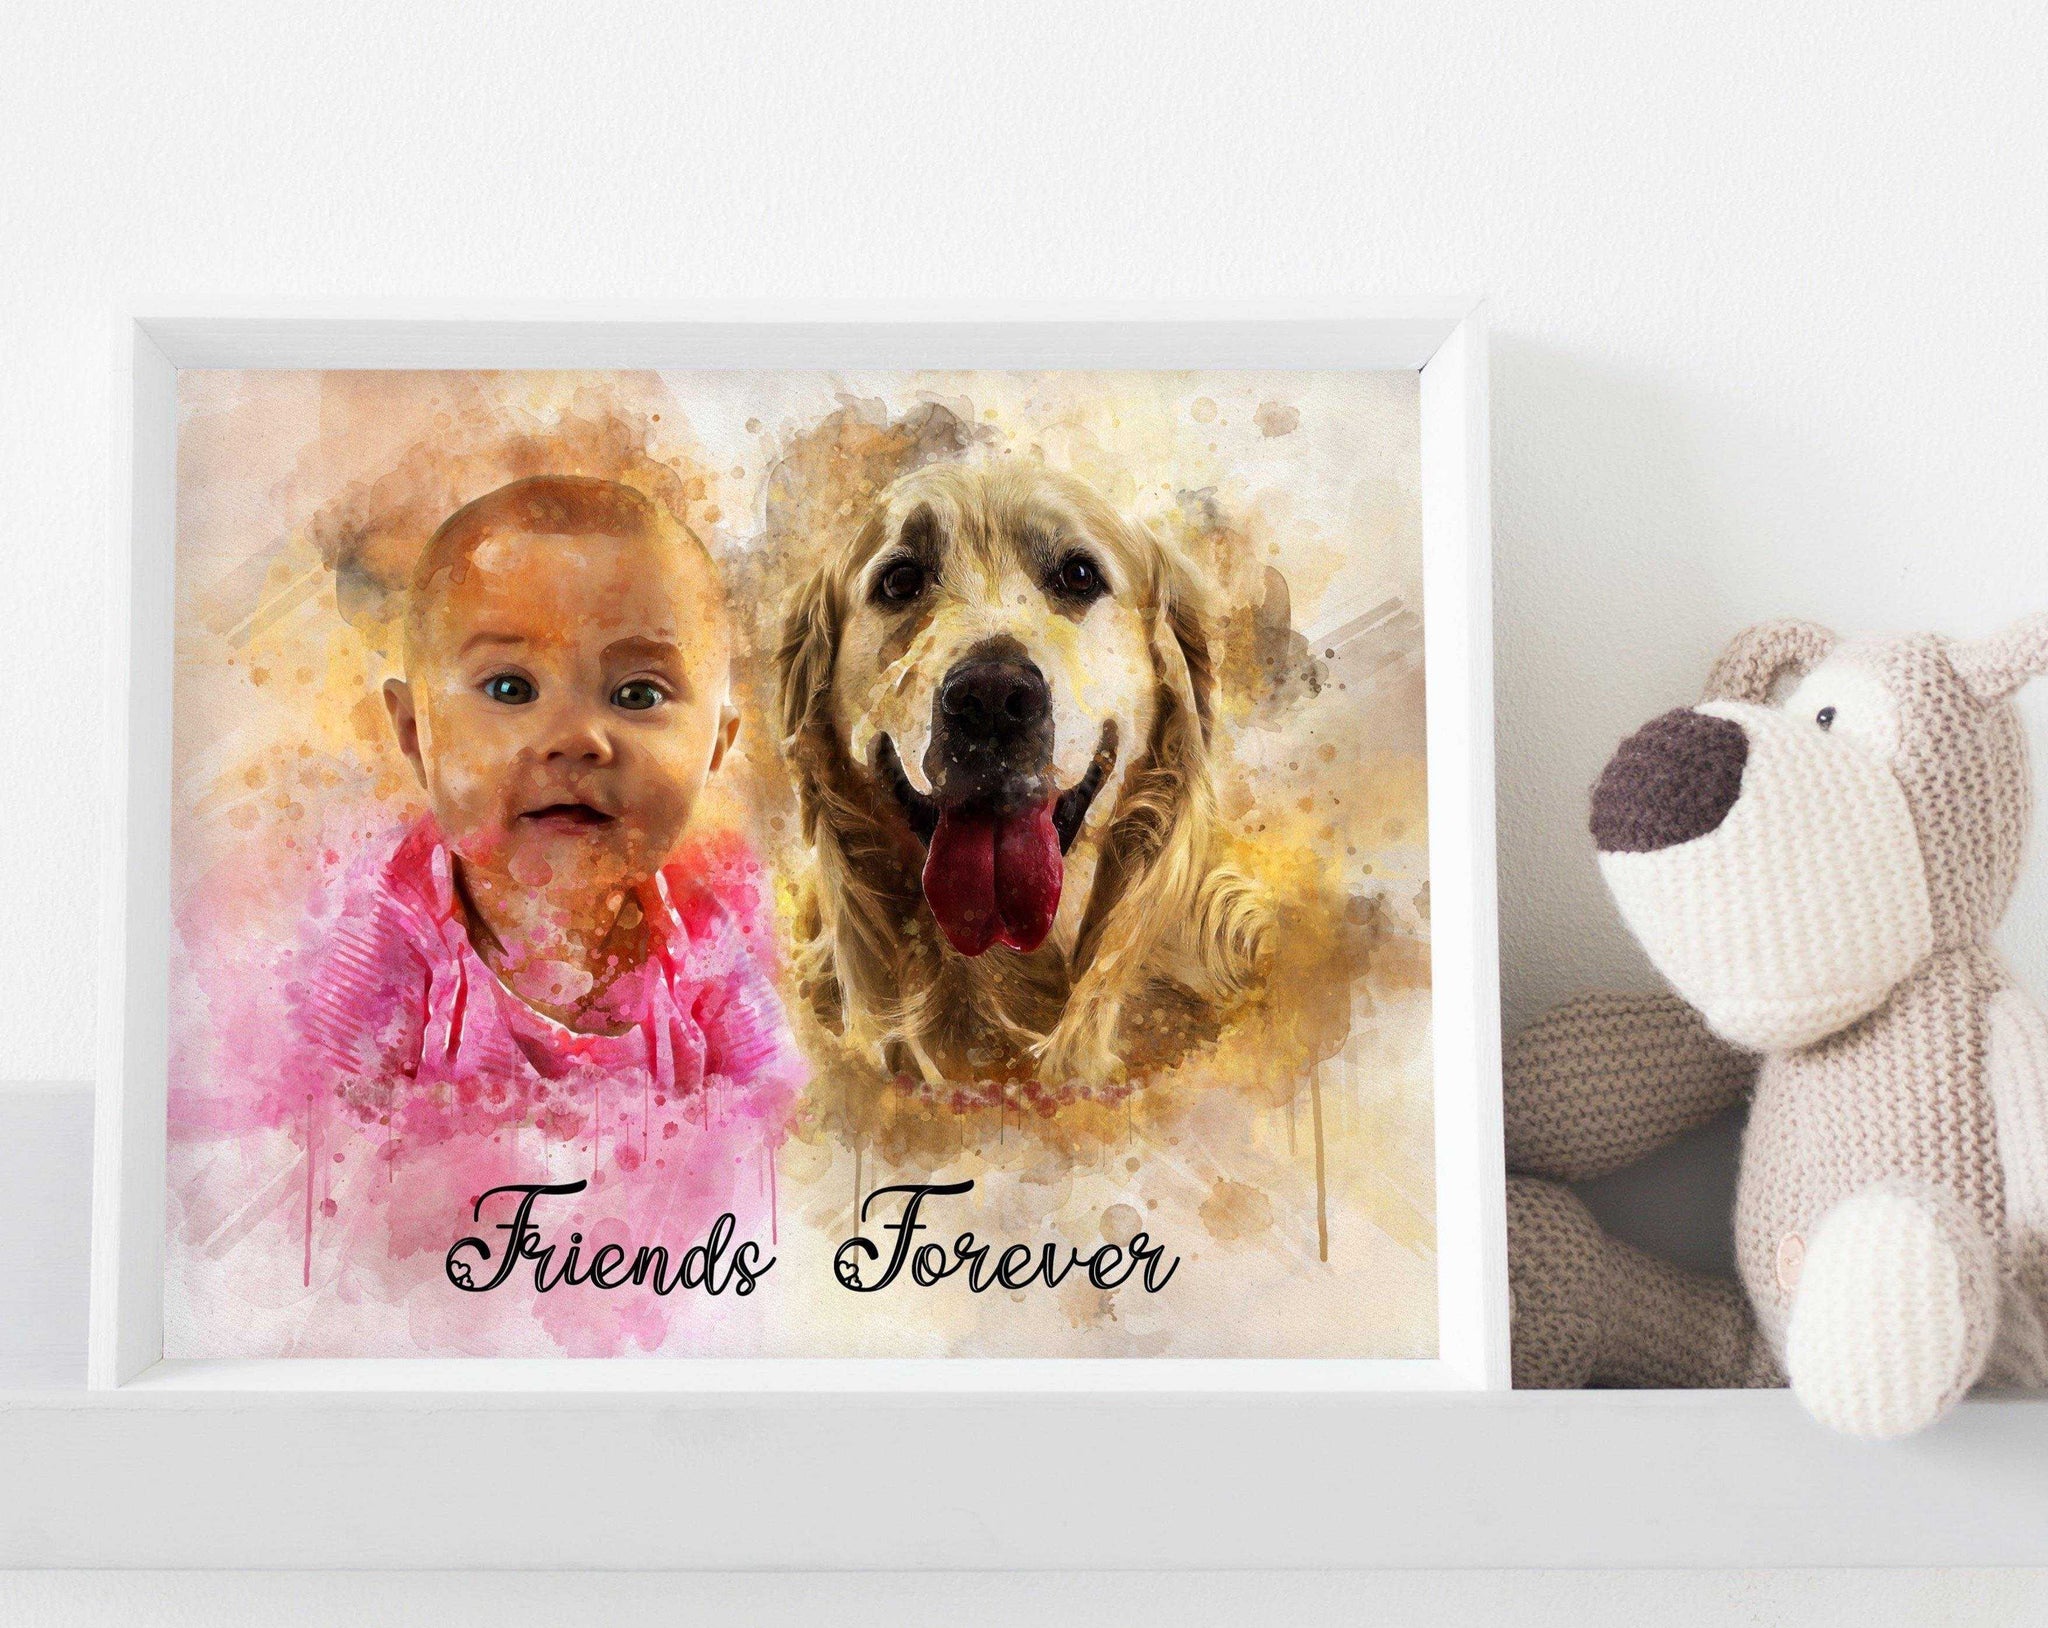 Custom Pet Loss Gifts, You Left Paw Prints On My Heart Painting, Pet Sympathy Gift, Meaningful Memorial Gift - FromPicToArt